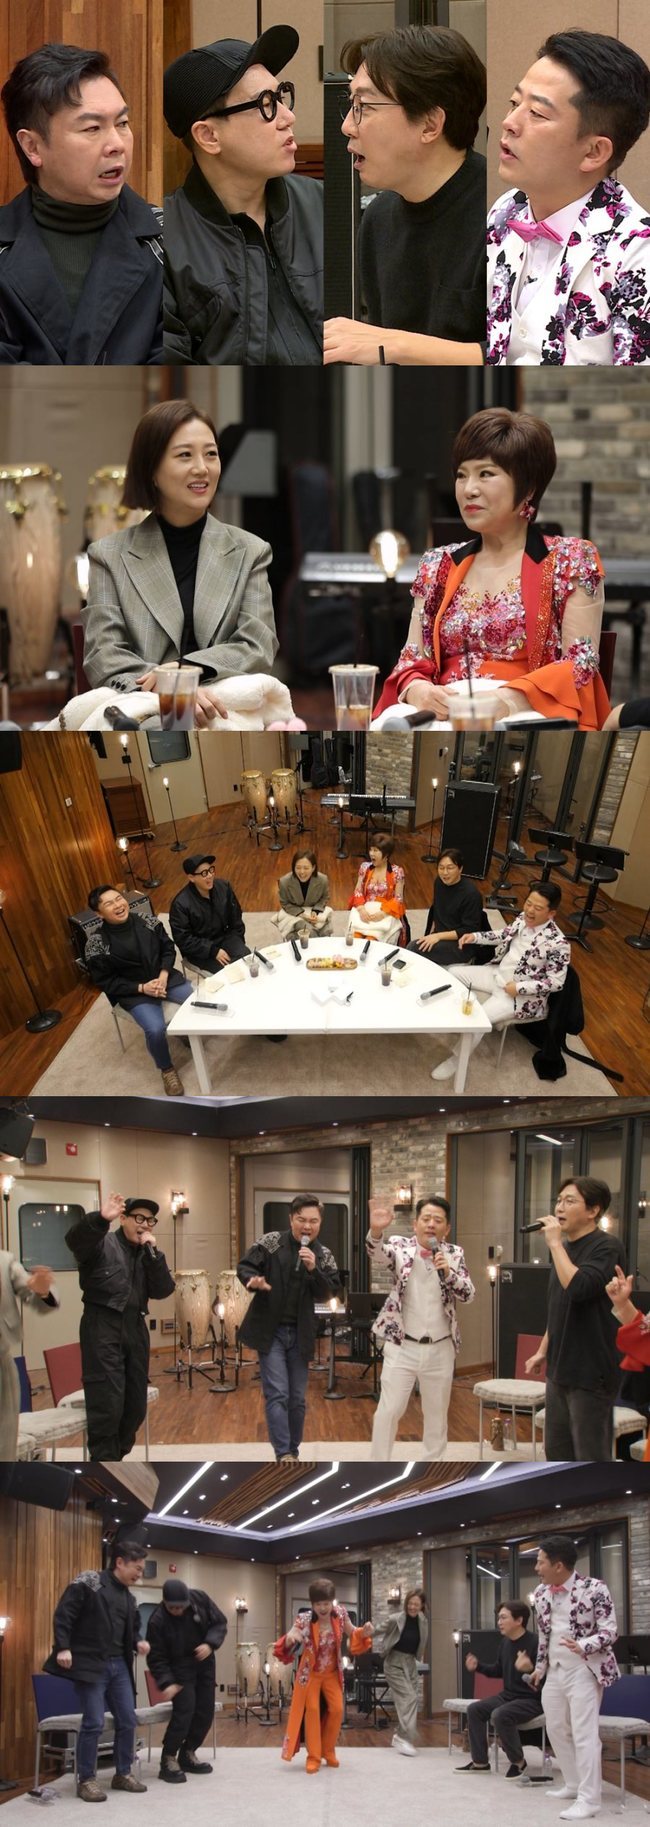 Singer Jang Yun-jeong talks about pocket money to parentsOn February 1, SBS Take off your shoes and dolsing foreman, trot queens Yonja Kim and Jang Yun-jeong will appear and give a lonely holiday to Dolsing Foreman.Lee Sang-min, who was on the 50th holiday on the day, expressed loneliness on the holiday, saying that it would become more lonely when it was a holiday.So, Dolsing Forman expressed his anger and made the scene into a laughing sea, saying that there was the worst word I did not want to hear while talking about nagging that I did not want to hear on the holiday.Yonja Kim and Jang Yun-jeong, who watched Dolsing Forman, were saddened.Dolsing Forman began a controversy on pocket money by asking his parents how much they would pay for the holidays. Jang Yun-jeong, who was listening, was a trot queen in a different pocket money class (?), which surprised Dolsing Forman.Kim Jun-ho made a fuss over everyone by showing his sincere envy to Jang Yun-jeong, saying, I want to be my daughter.Also, Dolsing Forman, who was talking about the difficult unknown days, could not keep his mouth shut in the unthinkable past of the original Korean Wave stars Yonja Kim and Trot Queen Jang-jong.Tak Jae-hun has attracted attention by revealing his unexpected career as a re-starter during his rookie days.Not only did everyone laugh at the identity of the role that they were in charge at the time, but also made the scene into a laughing sea with an anecdote that was praised by the staff for discovering unexpected talents during the acting.In addition, Tak Jae-hun pretended to be in the days when he did not have money and was in harmony with Jung Woo-sung and Lee Jung-jae (?)When Kim Jun-ho revealed the past, he blew a stone fastball and destroyed the scene, saying, Is it a high-end beggar?On the other hand, Yonja Kim and Jang Yun-jeong showed the stage of the explosion of the past class for the stones to be lonely alone.The scene was at its peak on the perfect stage of the event, and it was the back door that Dolsing Forman had not been able to get up and get up to the dance.